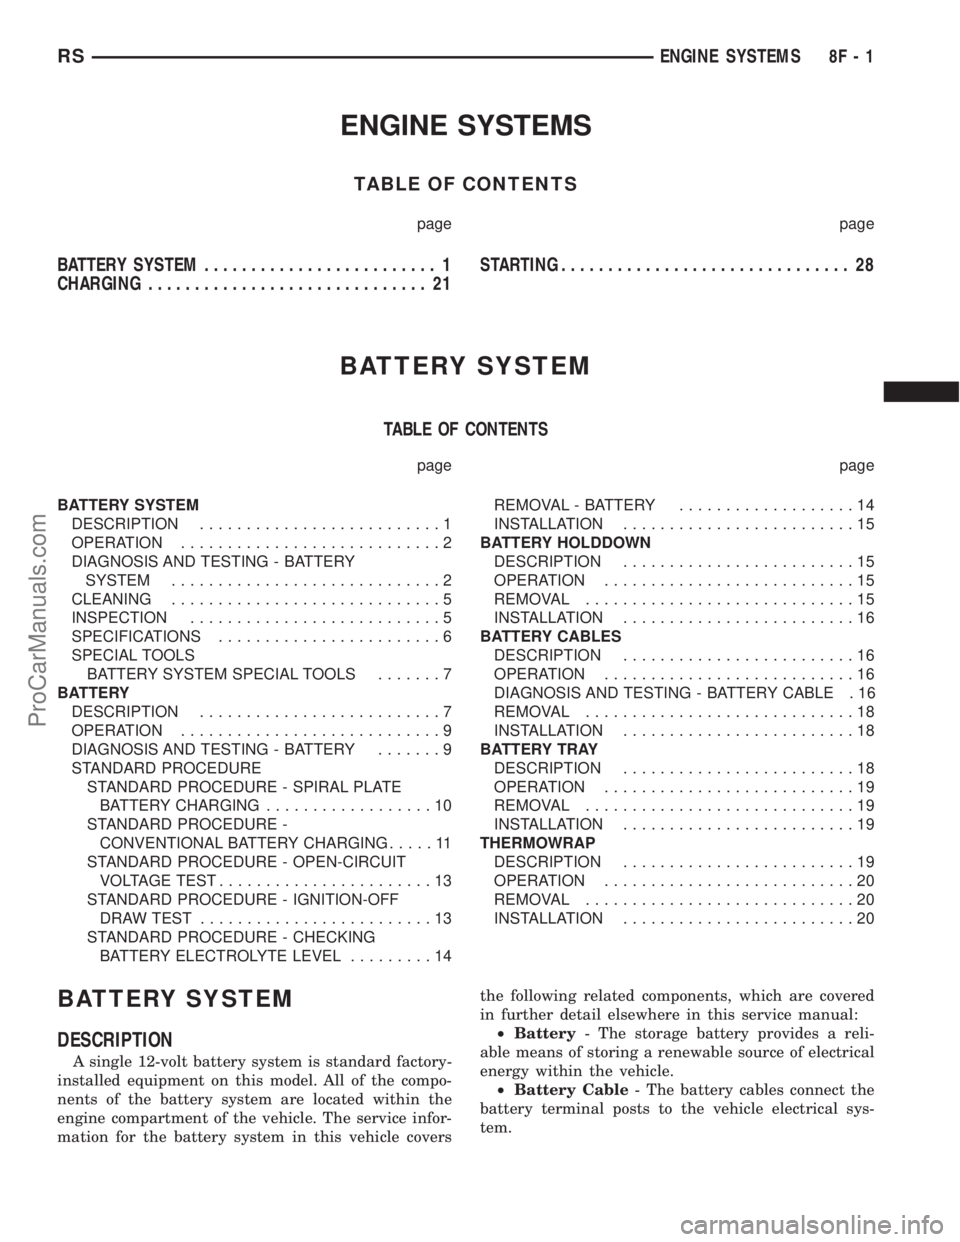 CHRYSLER CARAVAN 2002  Service Manual ENGINE SYSTEMS
TABLE OF CONTENTS
page page
BATTERY SYSTEM......................... 1
CHARGING.............................. 21STARTING............................... 28
BATTERY SYSTEM
TABLE OF CONTENT